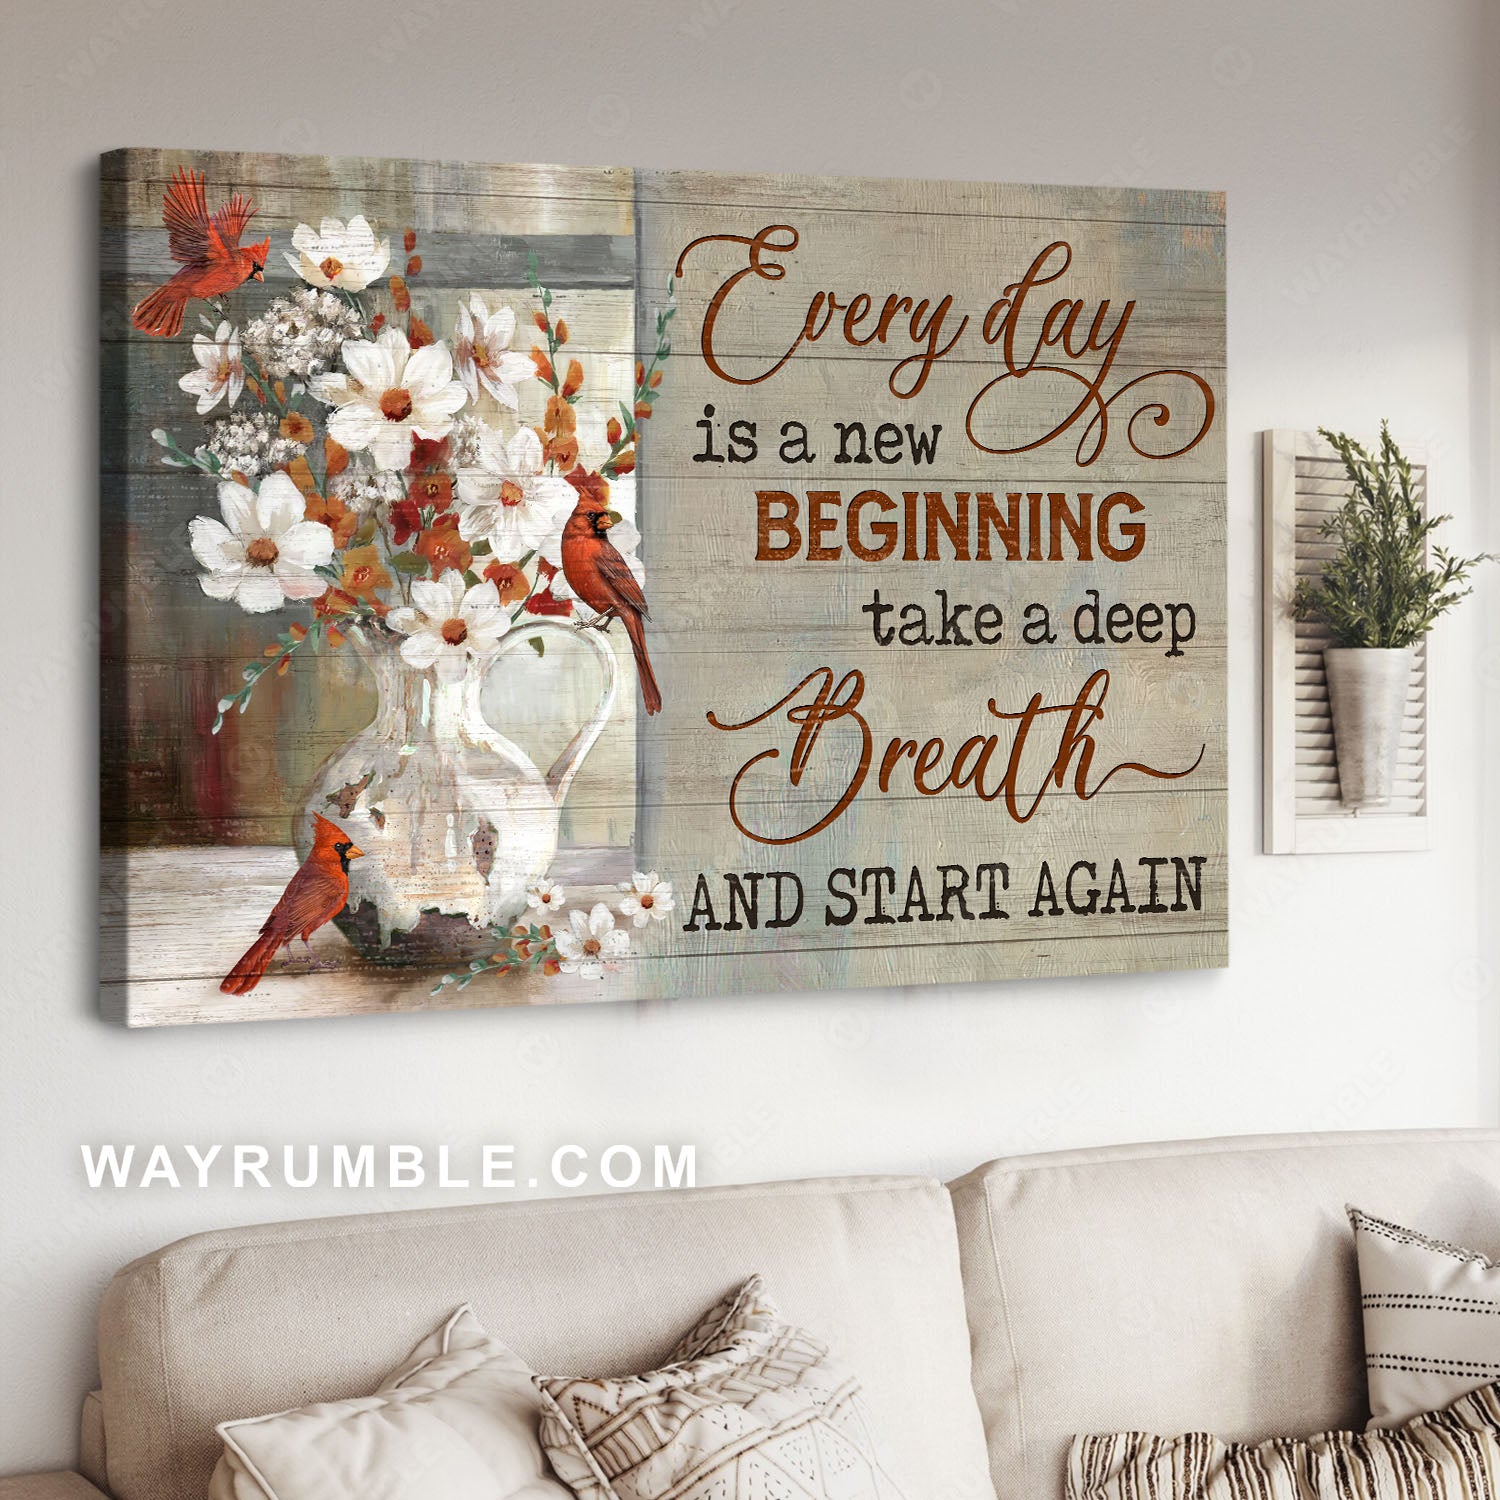 Red cardinals, White camellia, Flower vase, Every day is a new beginning - Jesus Landscape Canvas Prints, Christian Wall Art